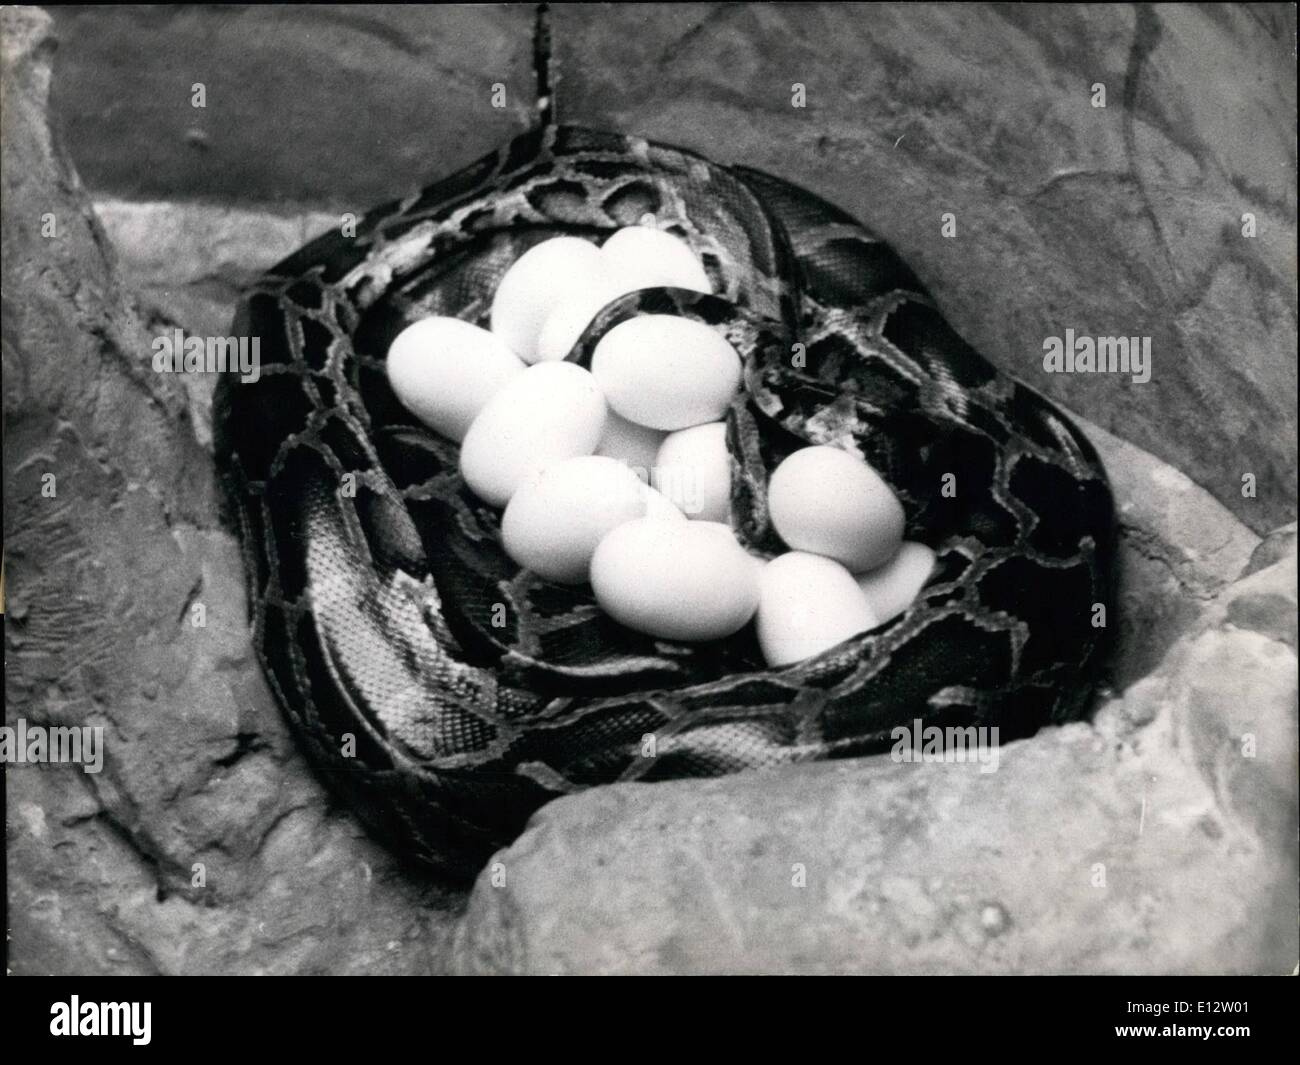 Feb. 25, 2012 - Zoological sensationa: Giant serpent hatching eggs: For the first time since 20 years a giant serpent laid eggs Stock Photo